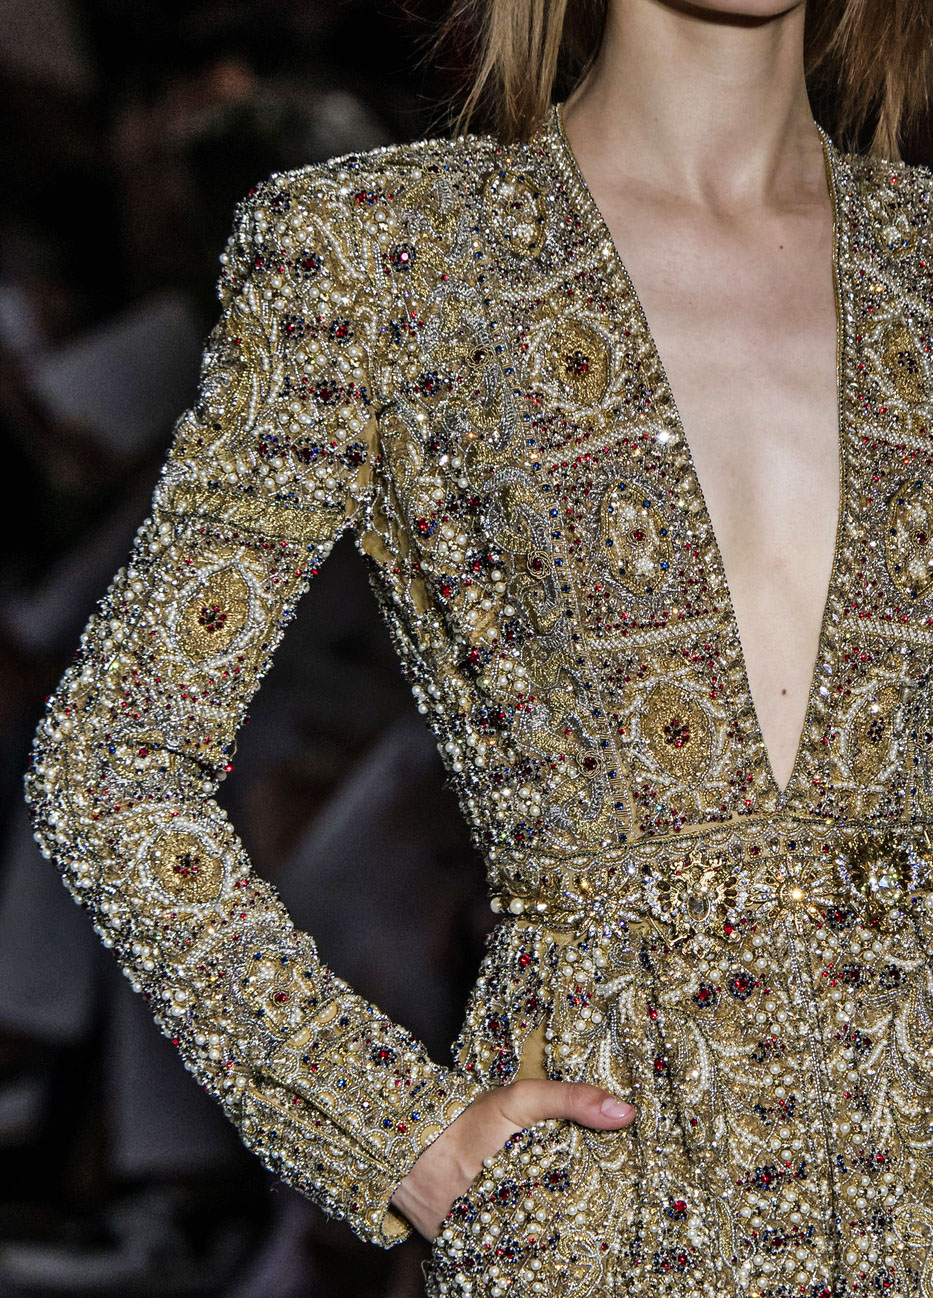 Zuhair Murad Haute Couture Fall/Winter 2018/19 collection inspired by a ...